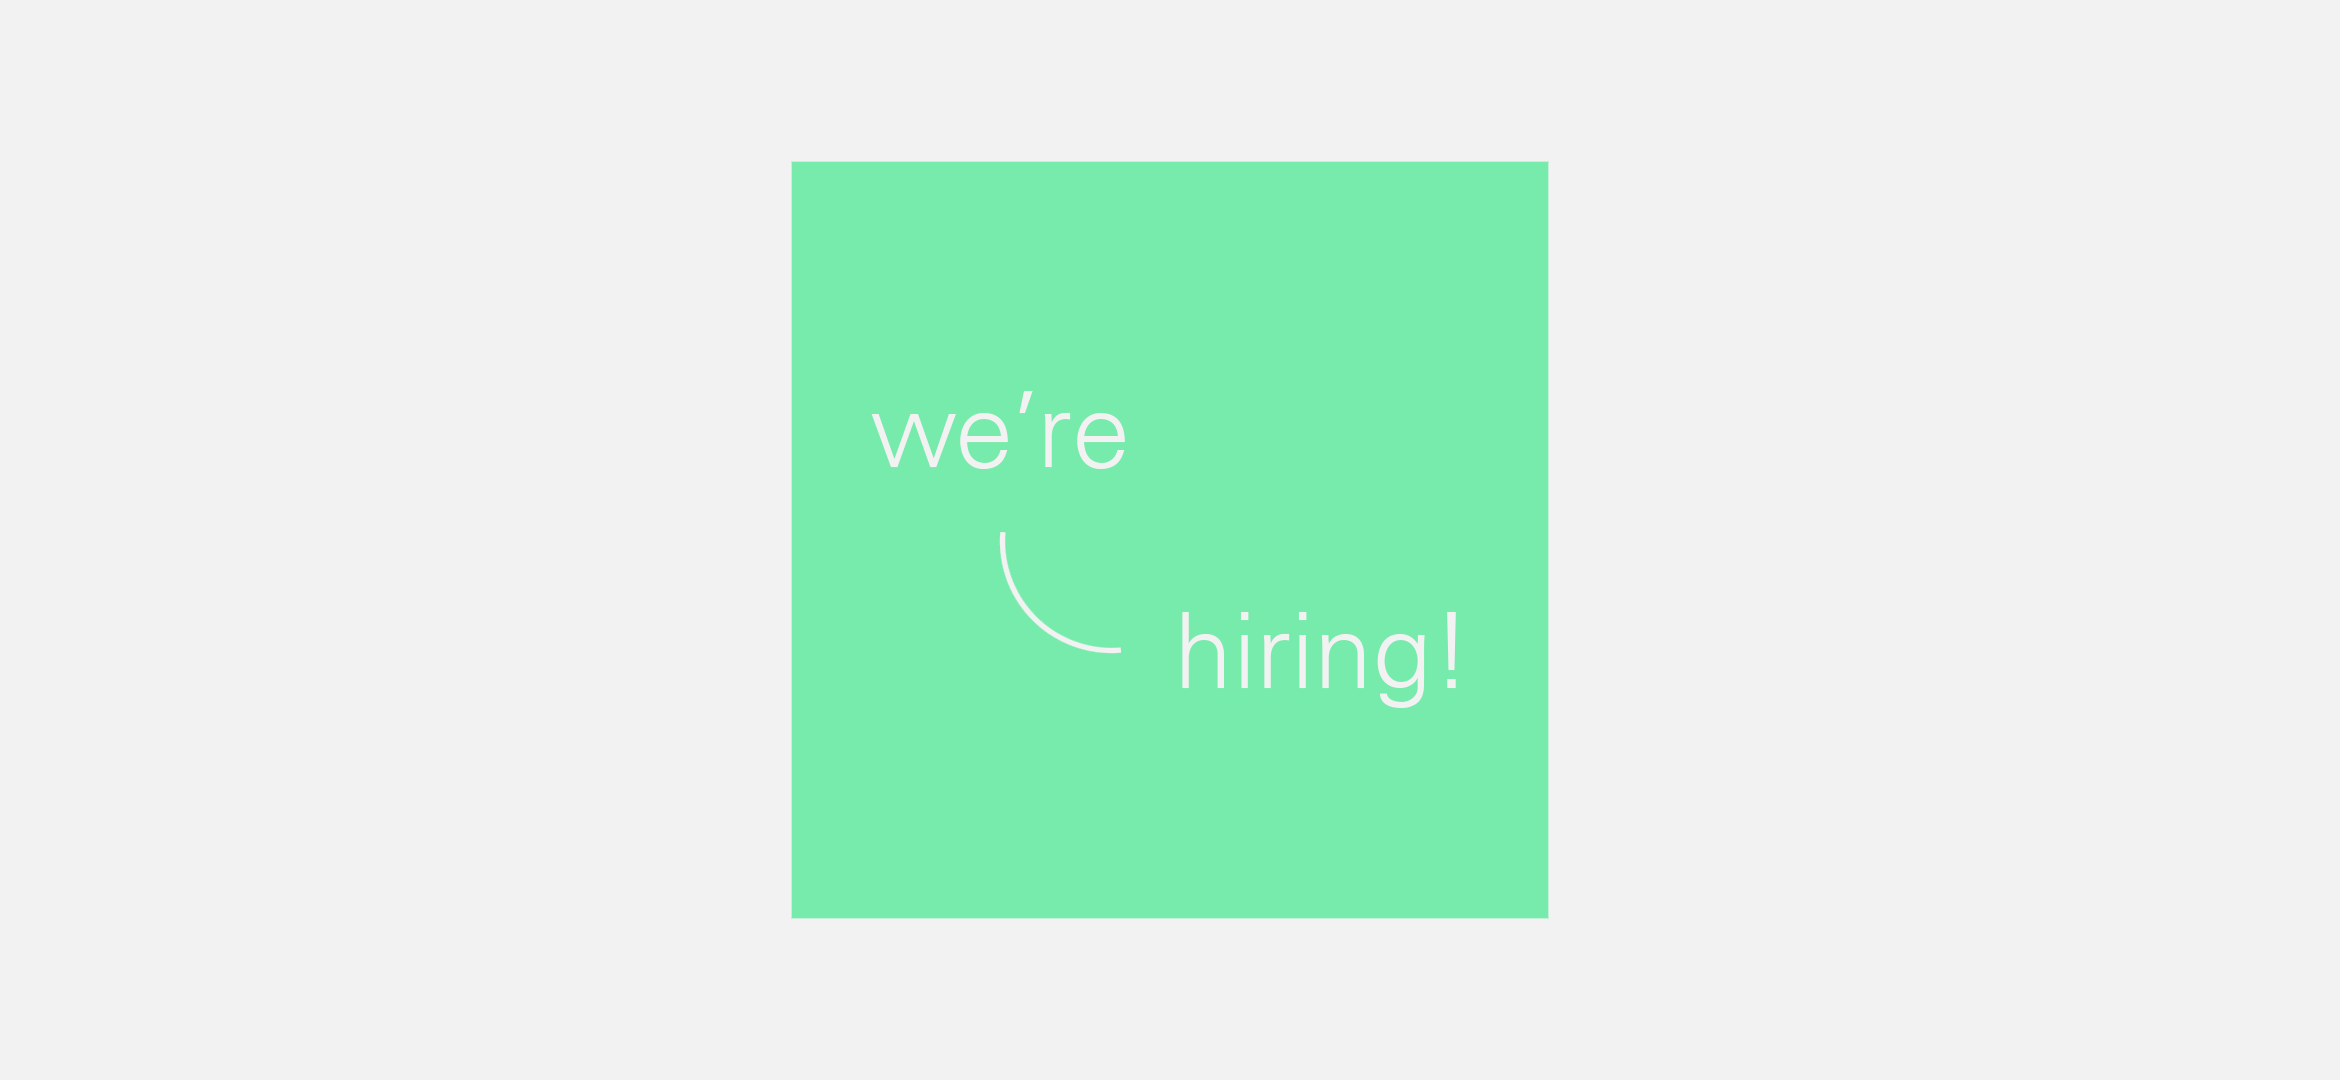 We are hiring! Part 2 architectural assistant